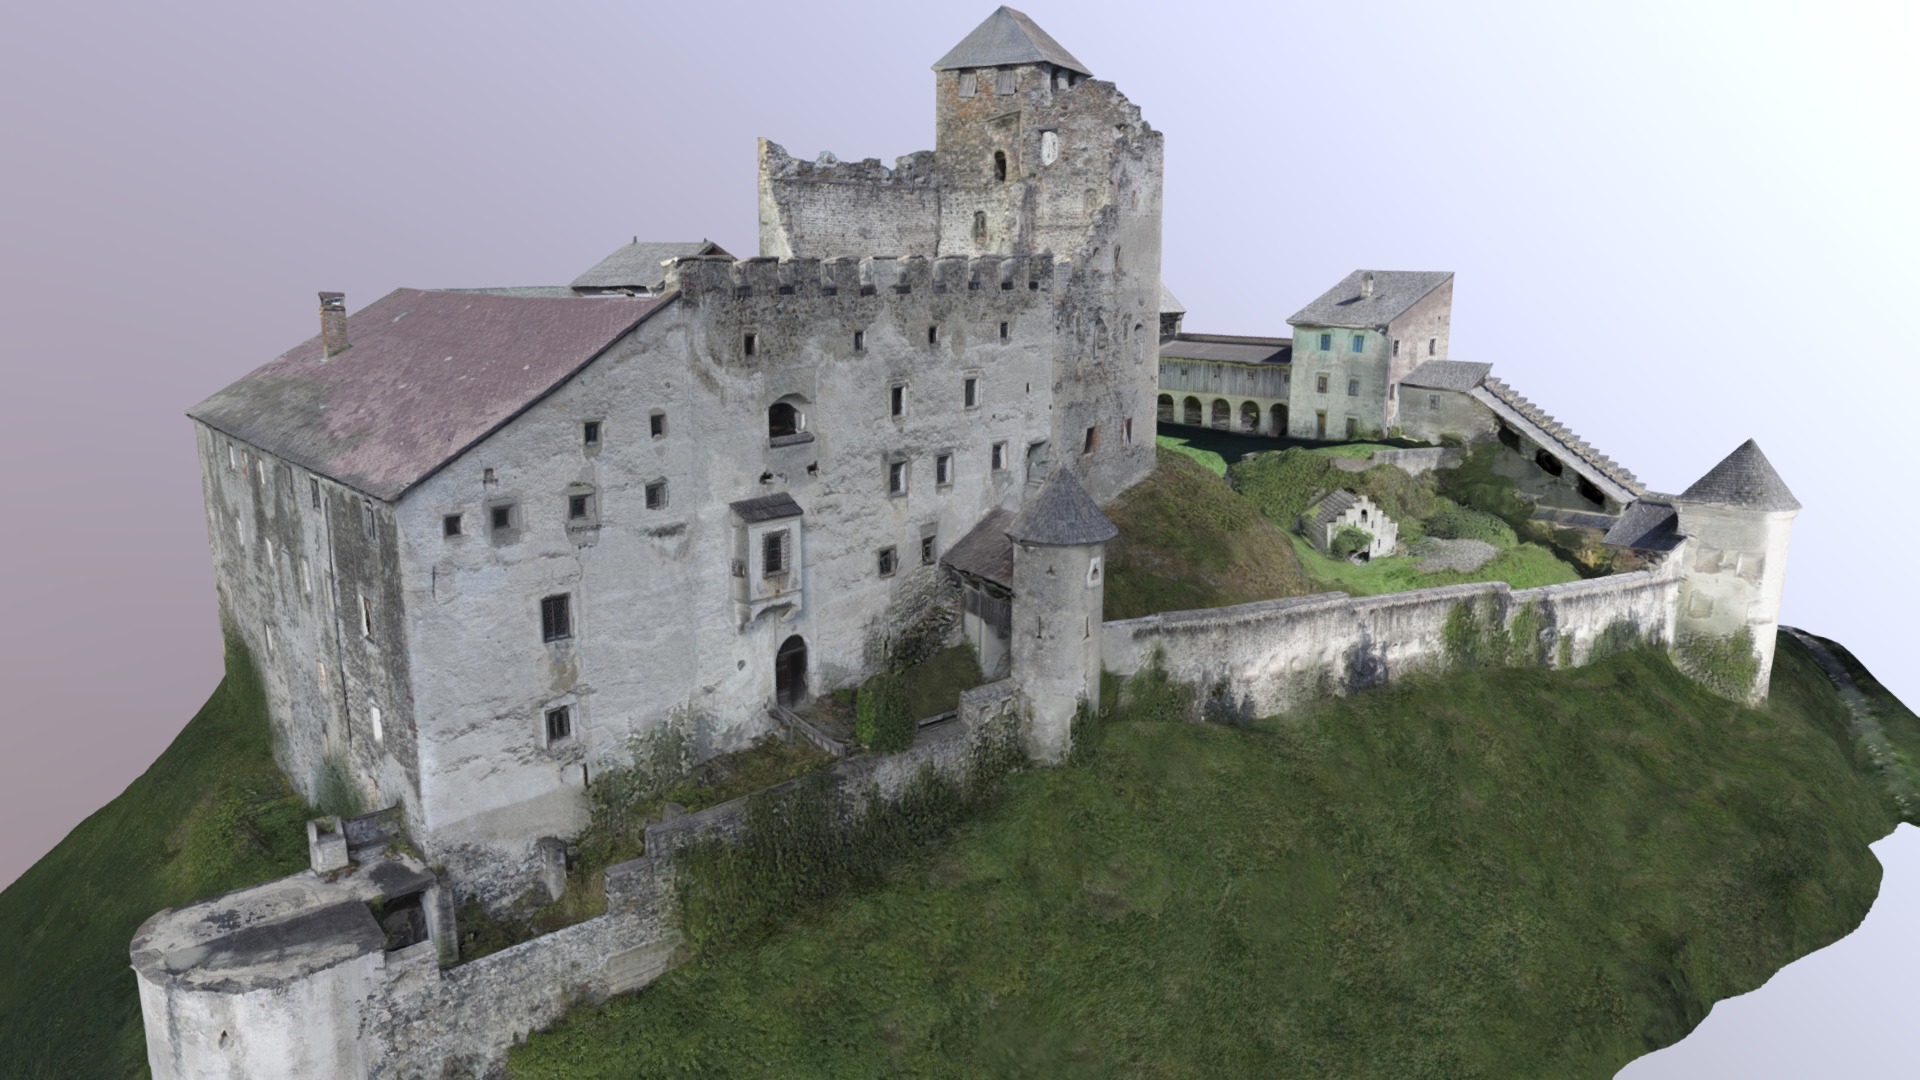 3D model Burg Heinfels - This is a 3D model of the Burg Heinfels. The 3D model is about a stone castle on a hill.